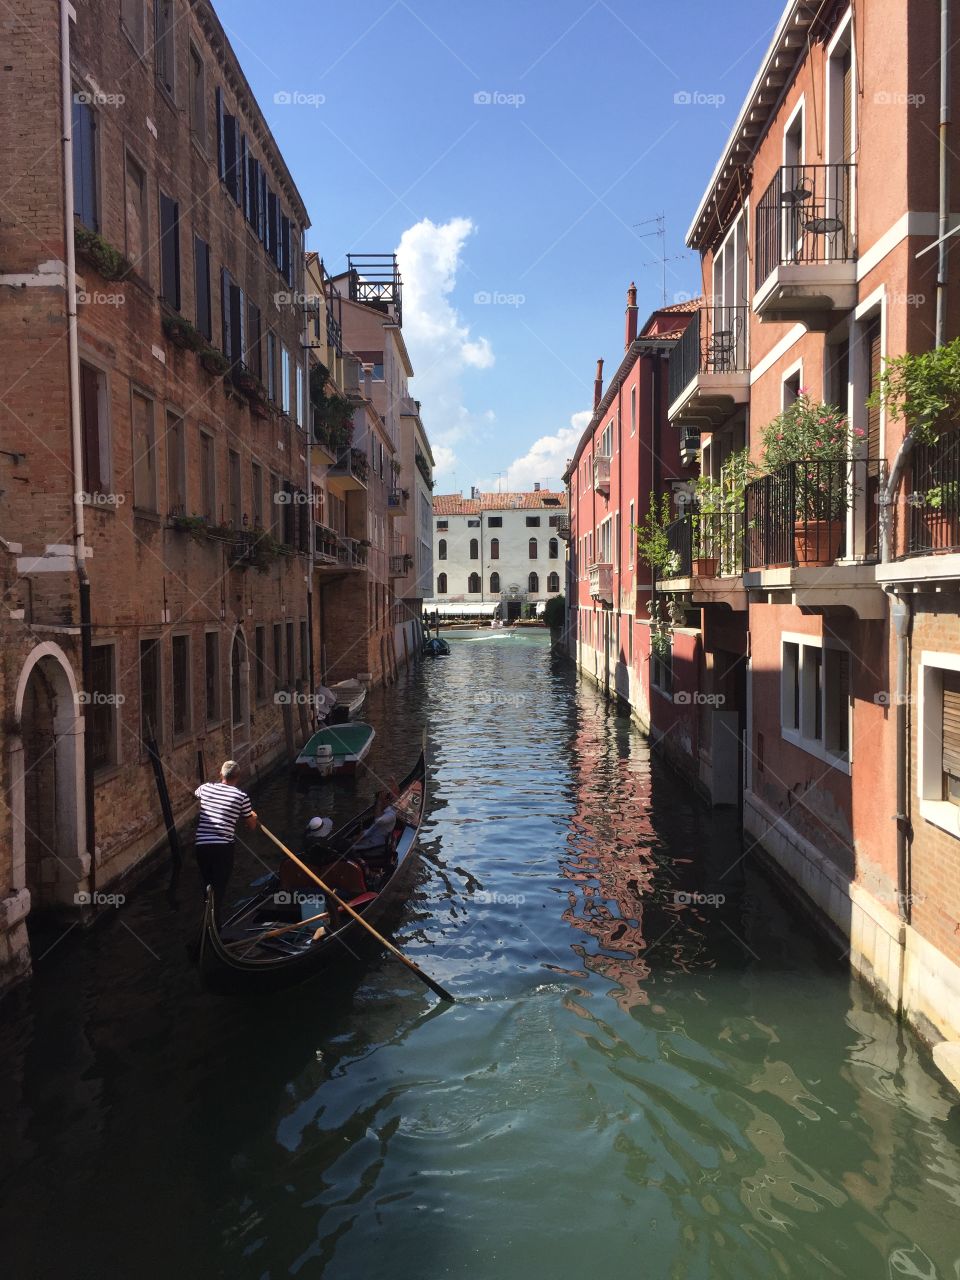 Canals and architecture in Venice - Italy